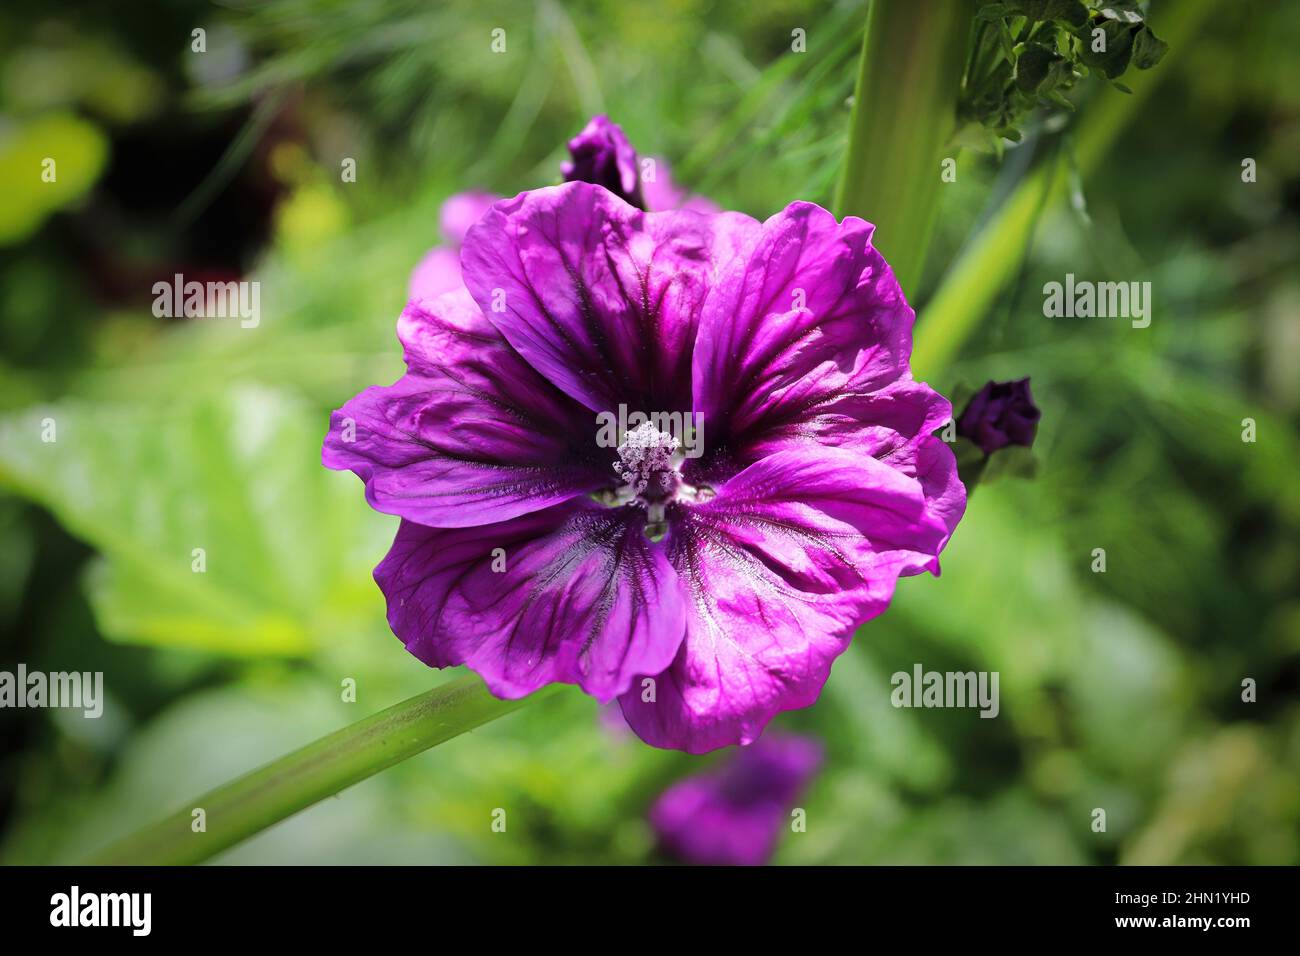 Closeup view of the purple petals on a mallow plant Stock Photo